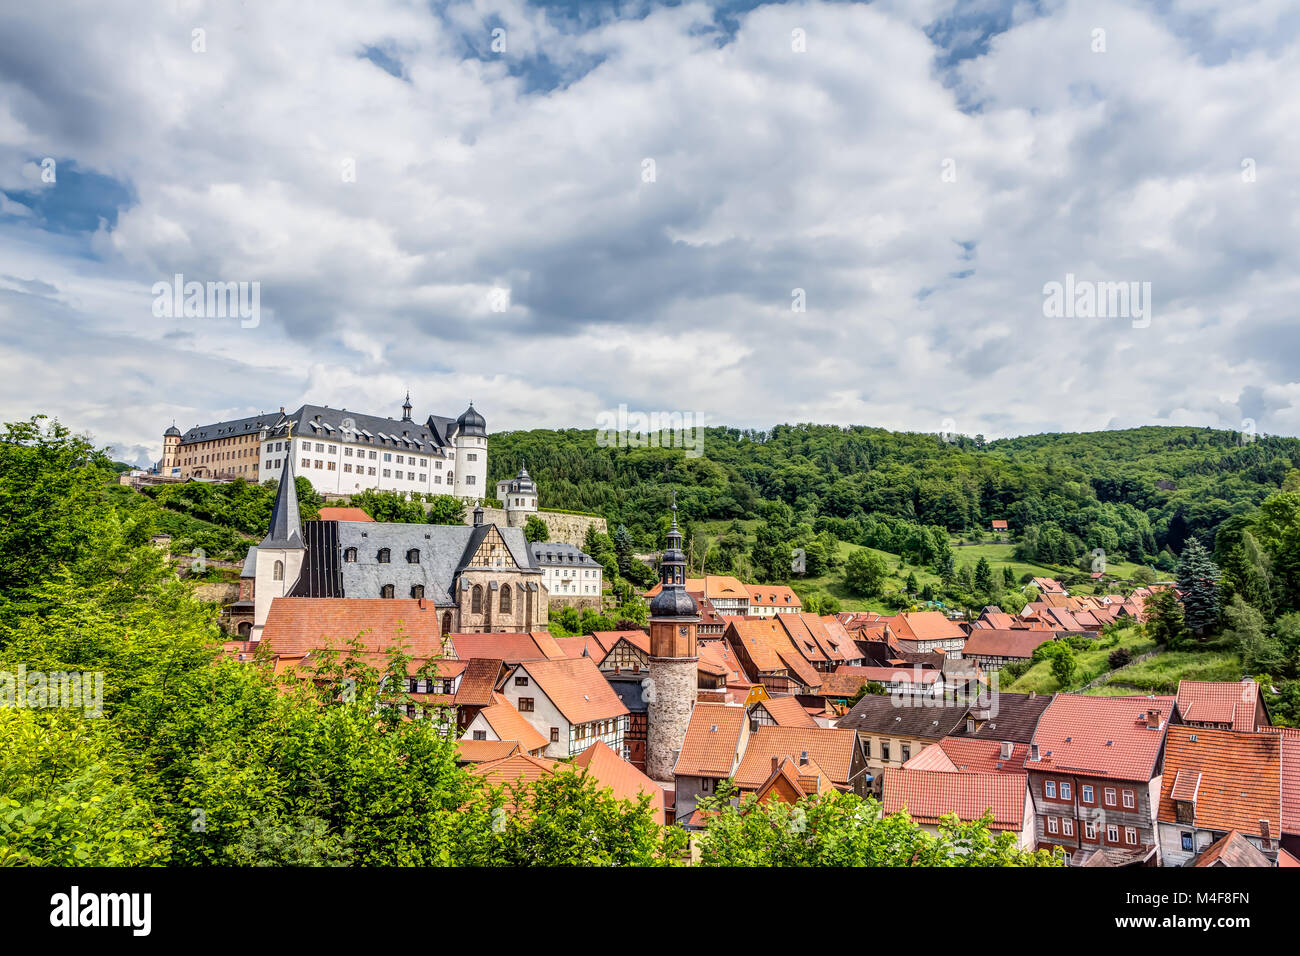 Stolberg in the Harz mountains in Germany Stock Photo